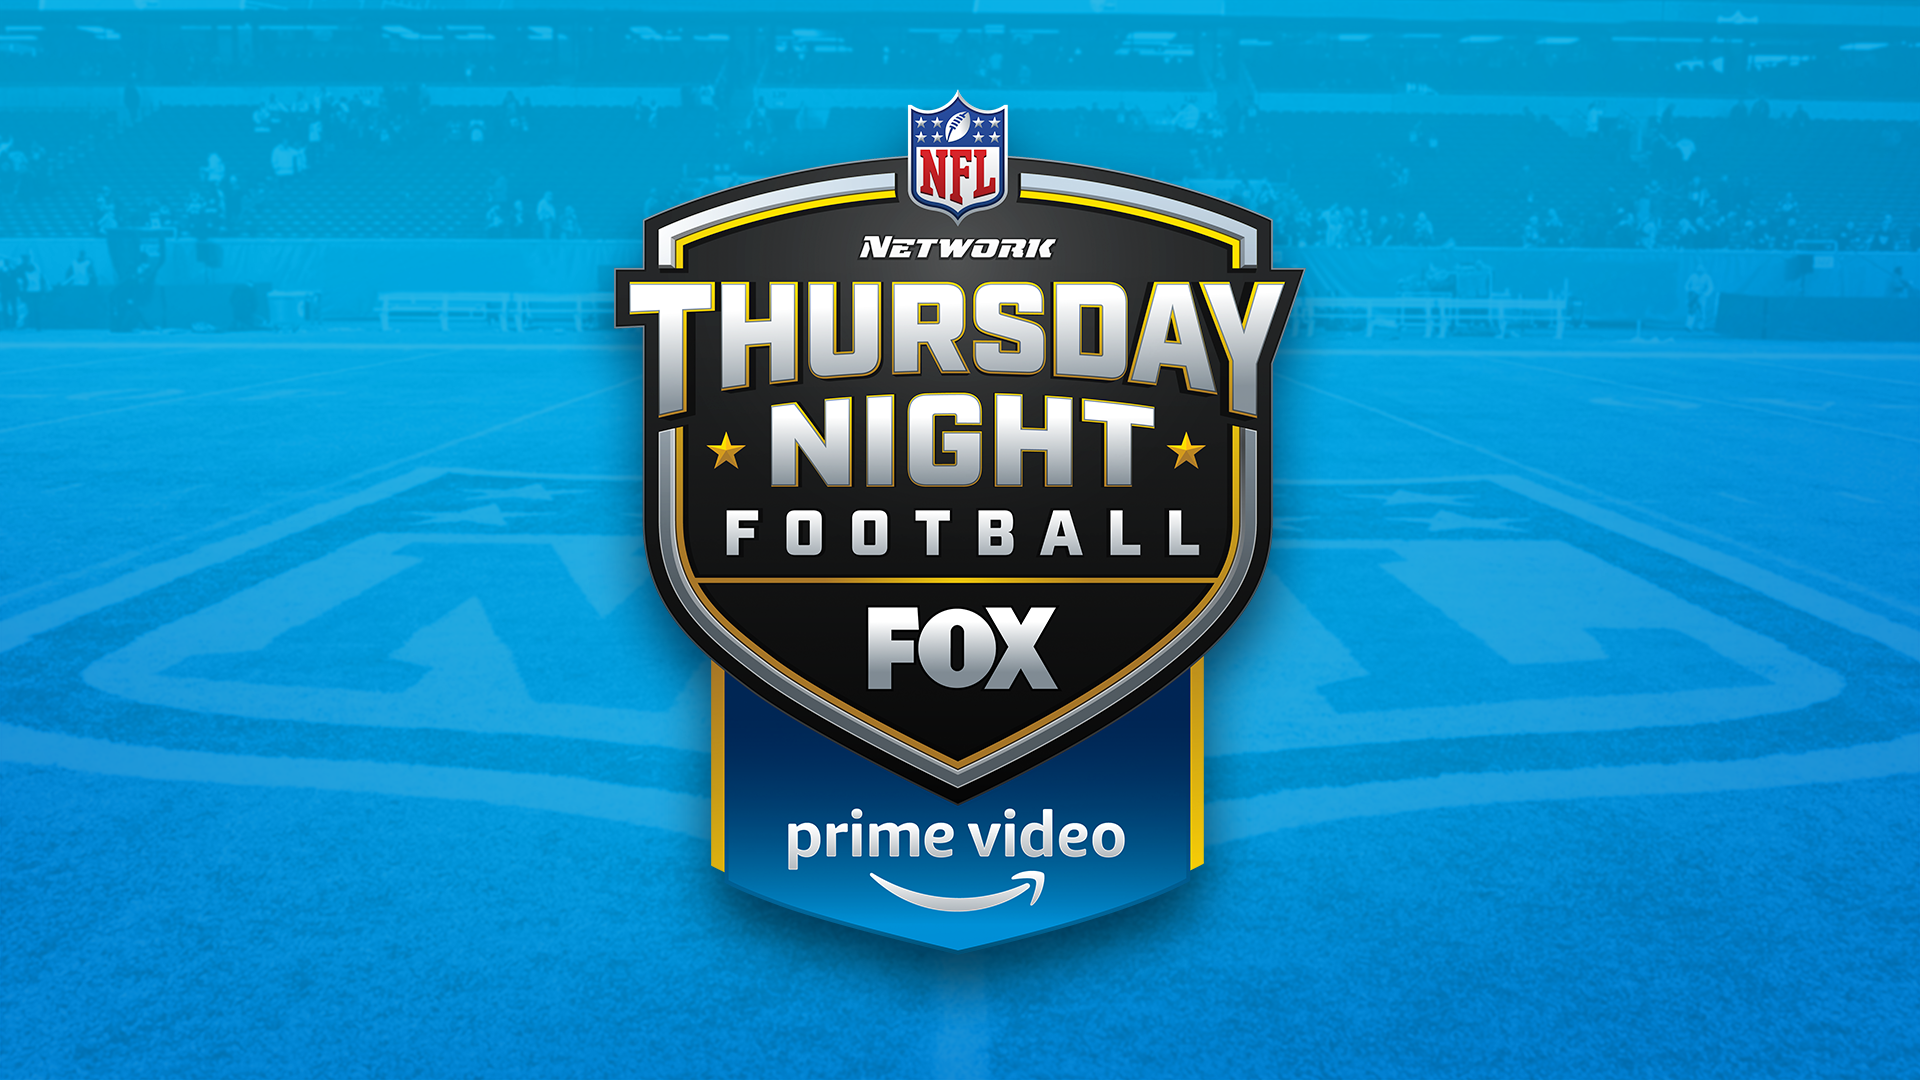 NFL Thursday Night Football provided by  Prime Video and